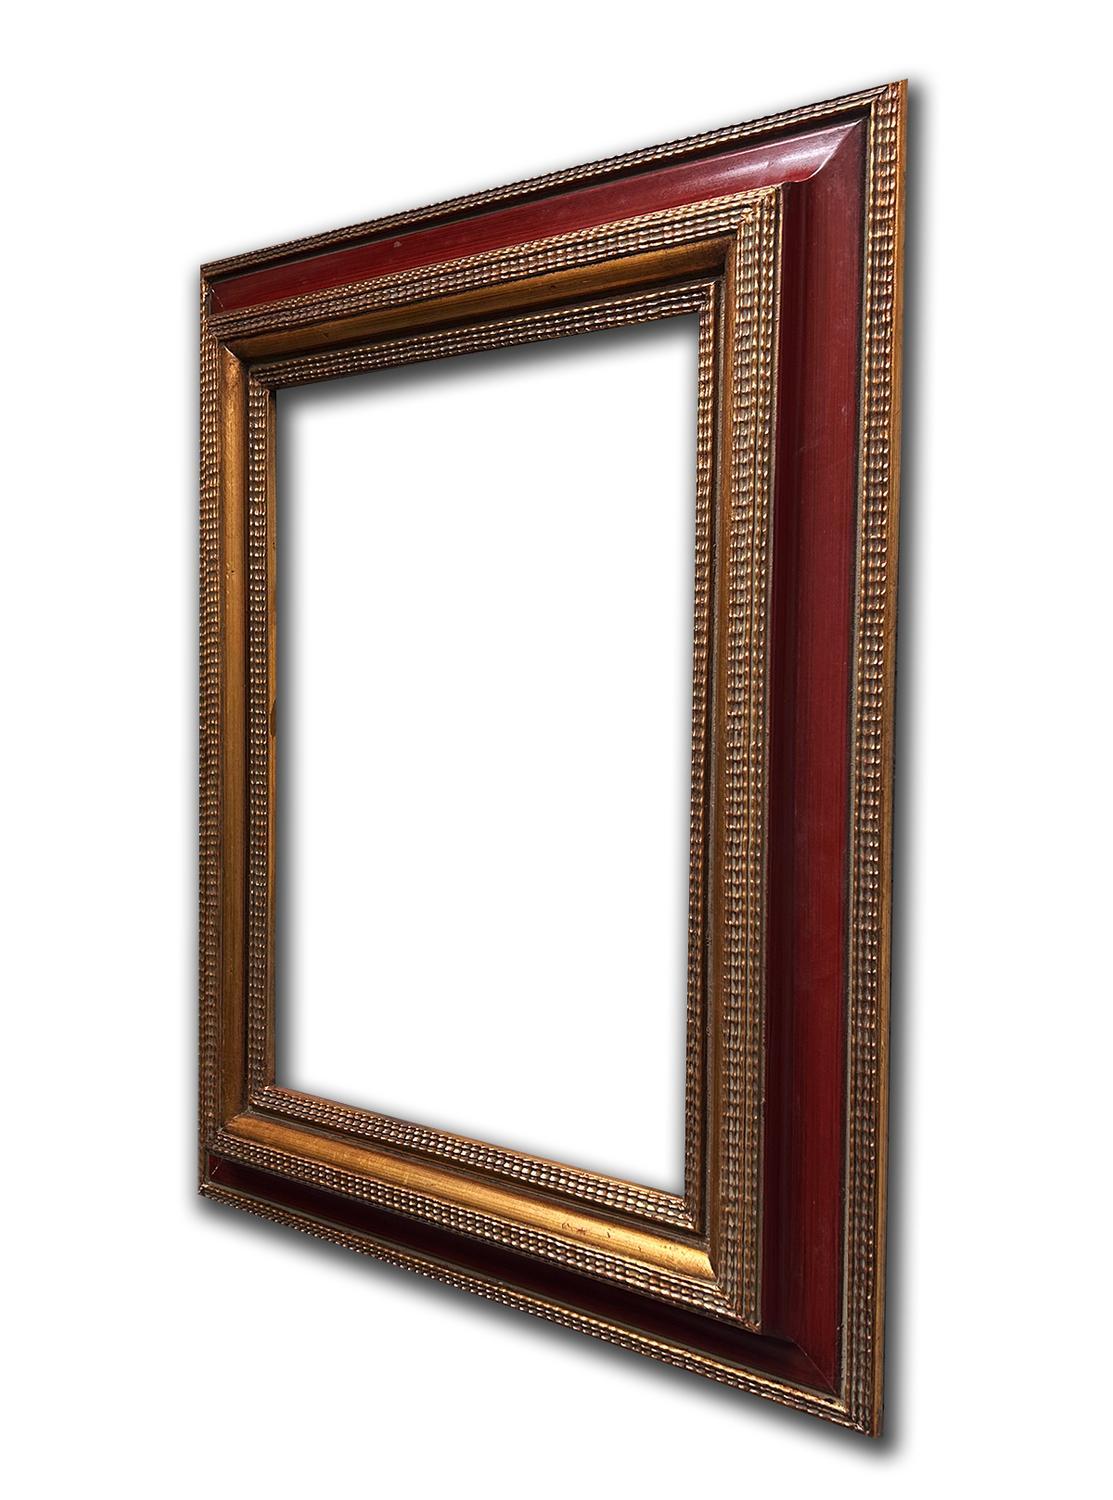 30x40 cm or 12x16 ins, wooden photo frame